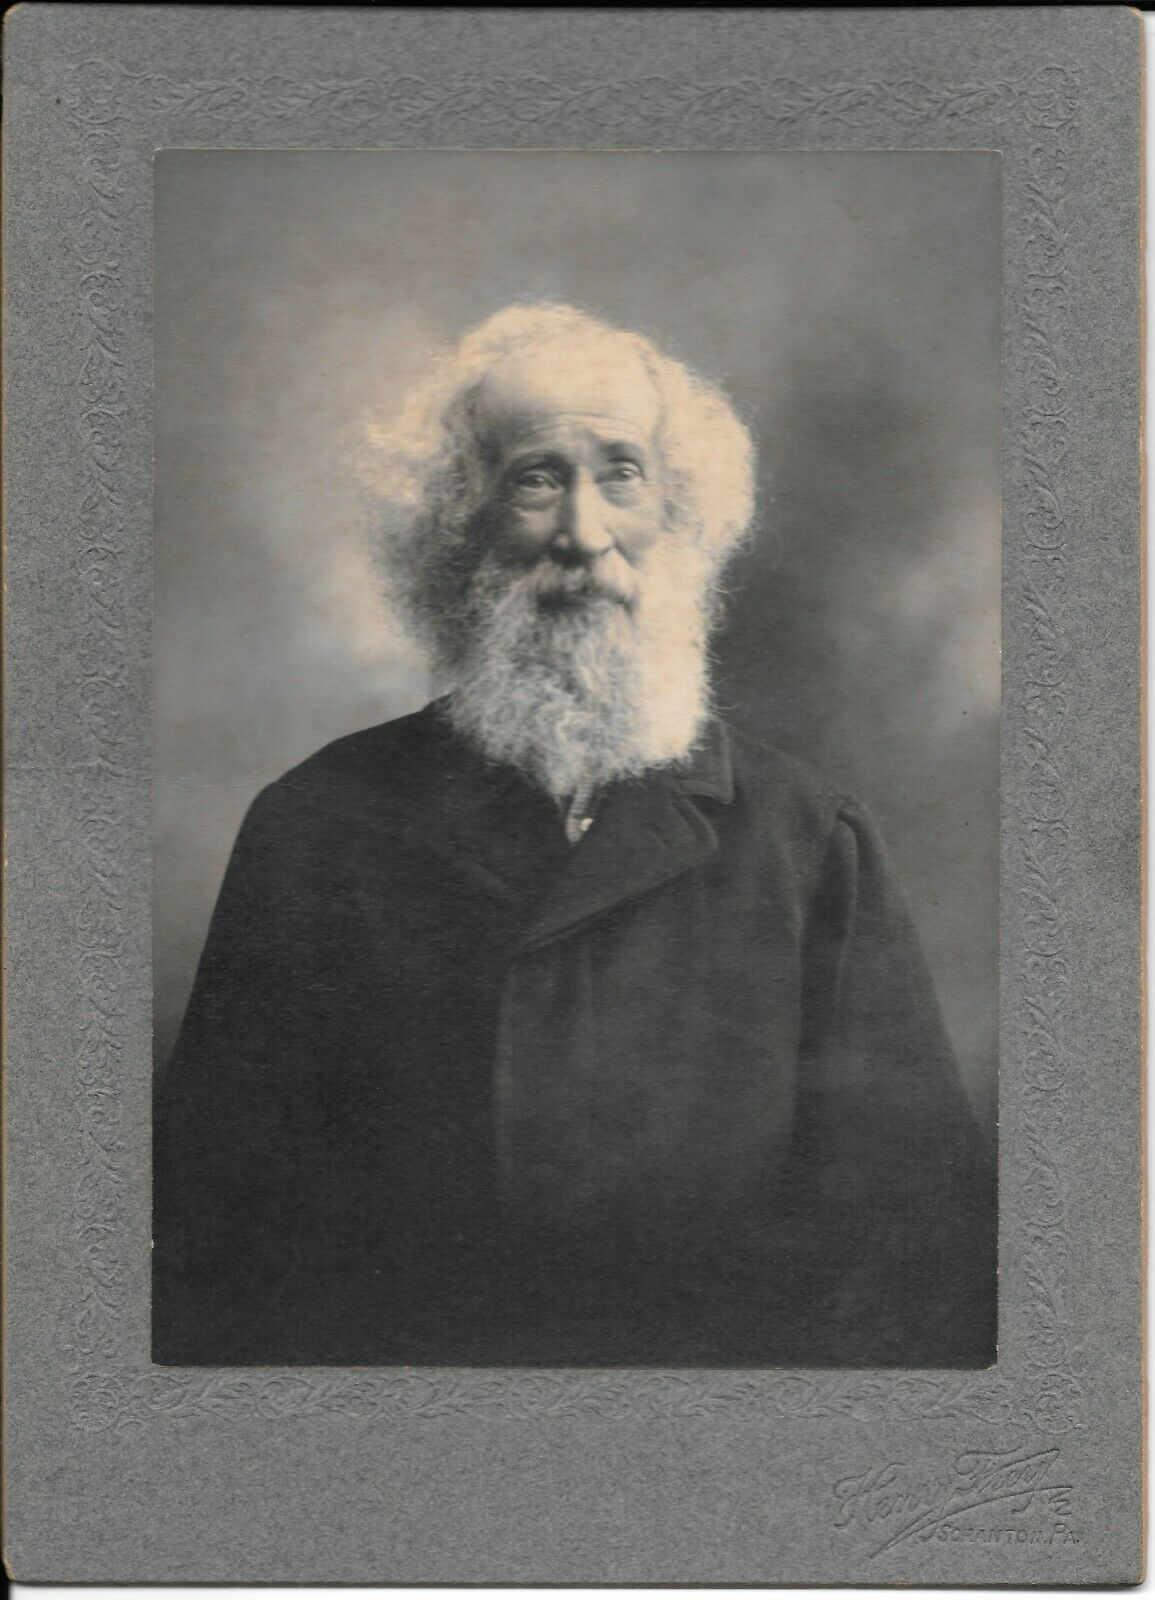 Rare Possible Walt Whitman ca. 1880's Large Cabinet Card Photo